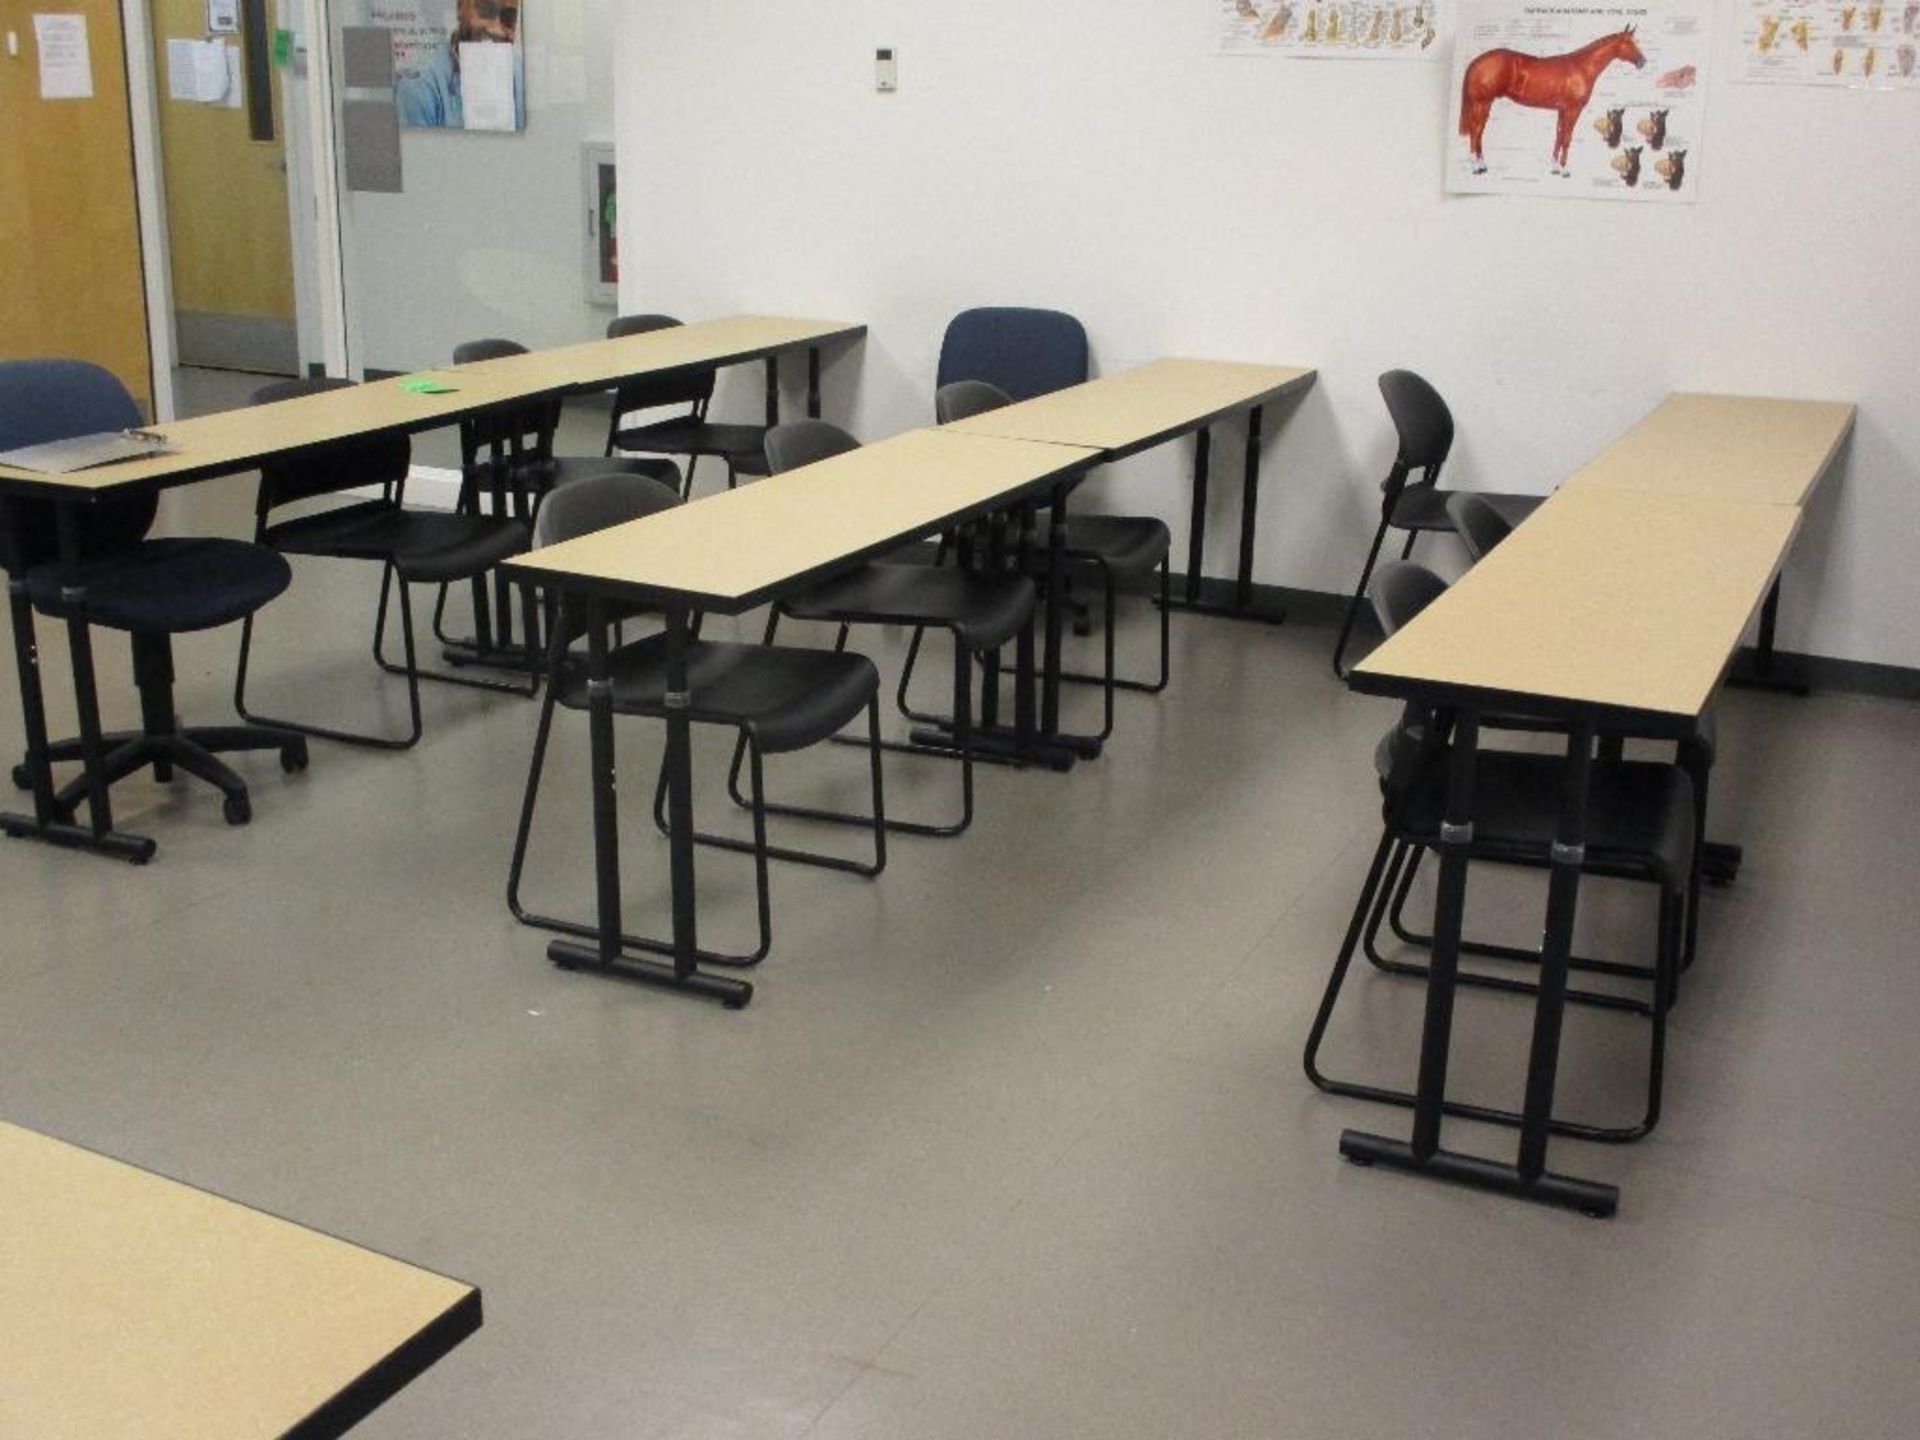 13 Tables, 21 Chairs and remaining contents not tagged in room - Image 5 of 5